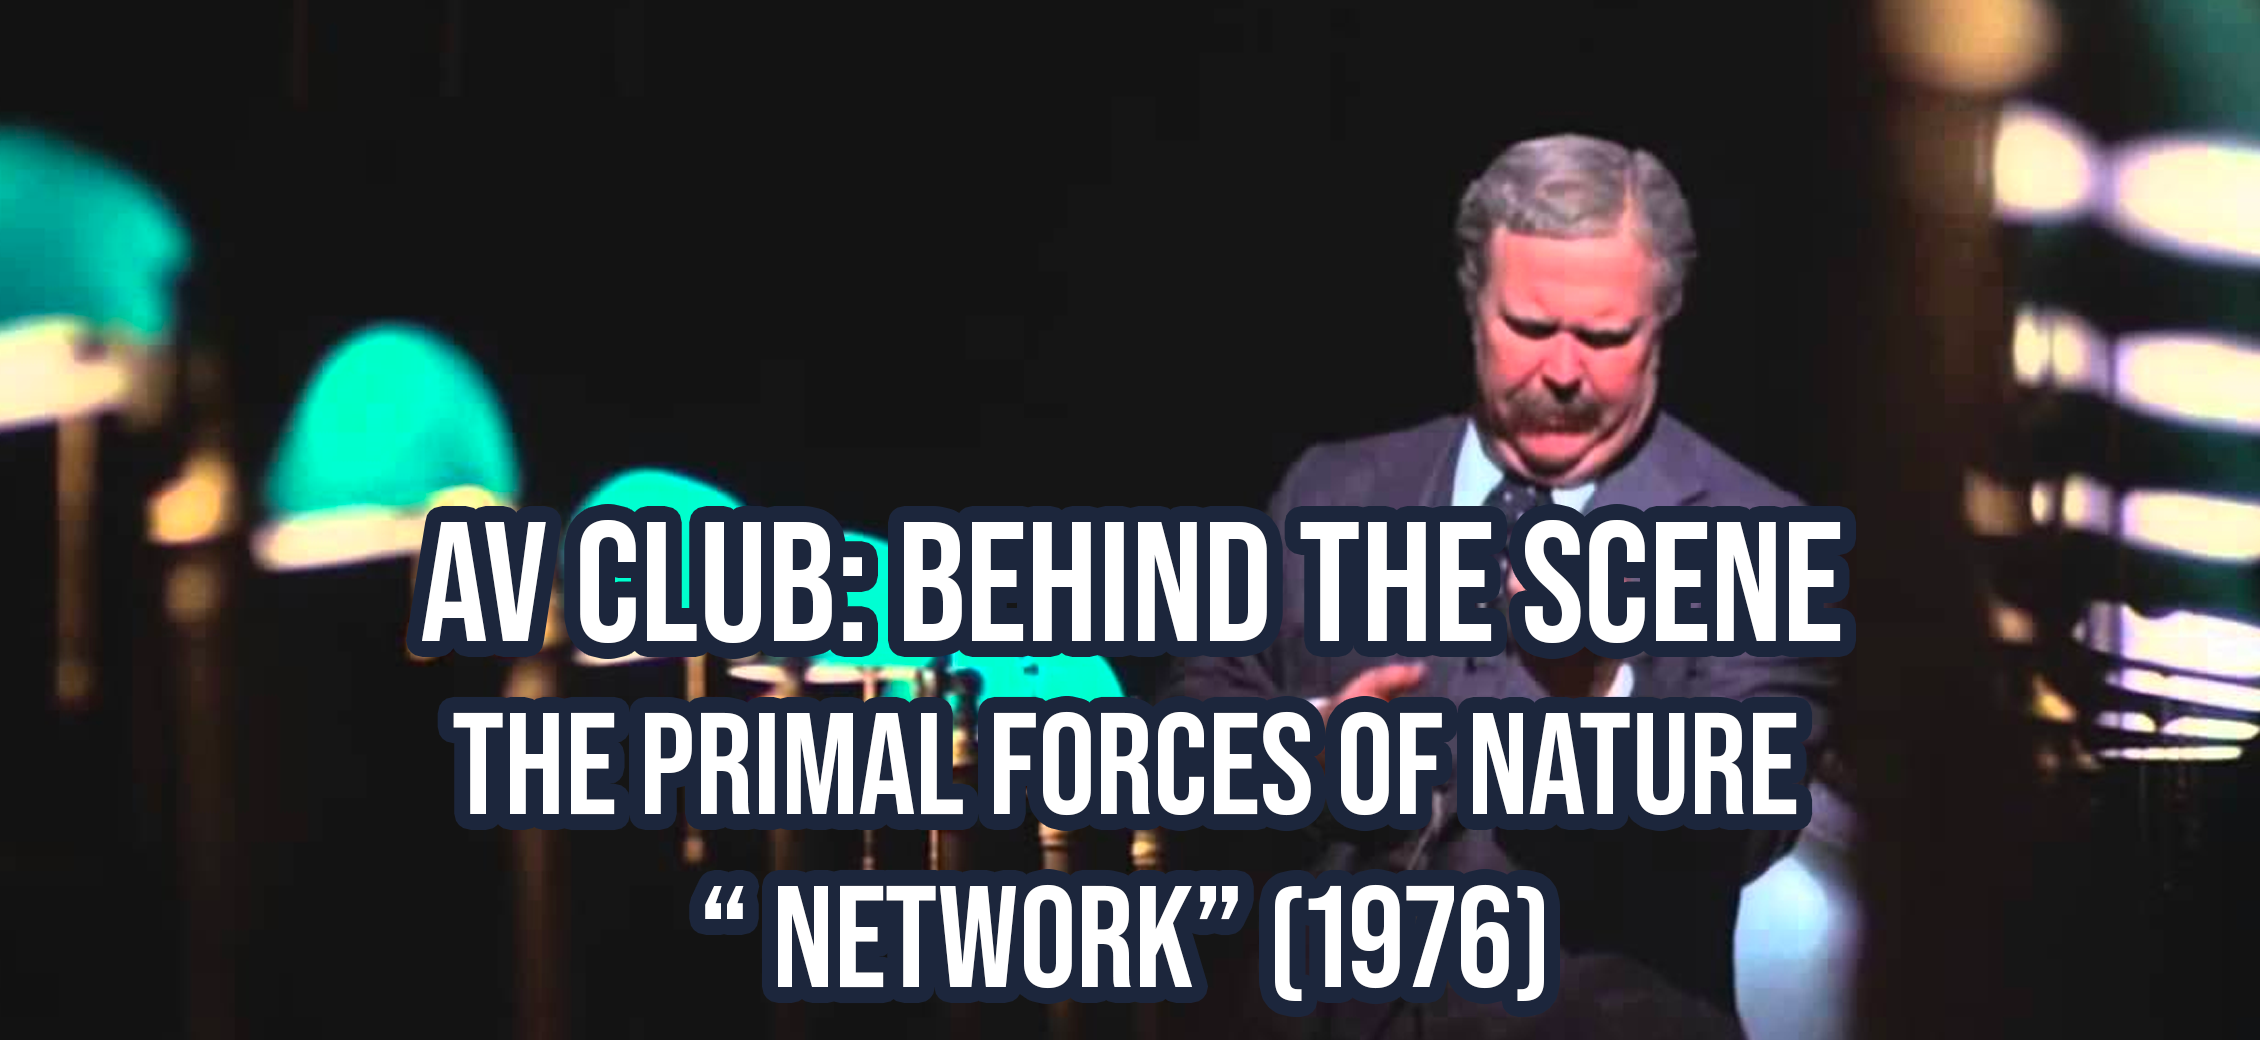 Behind the scene: The primal forces of nature “Network” (1976)